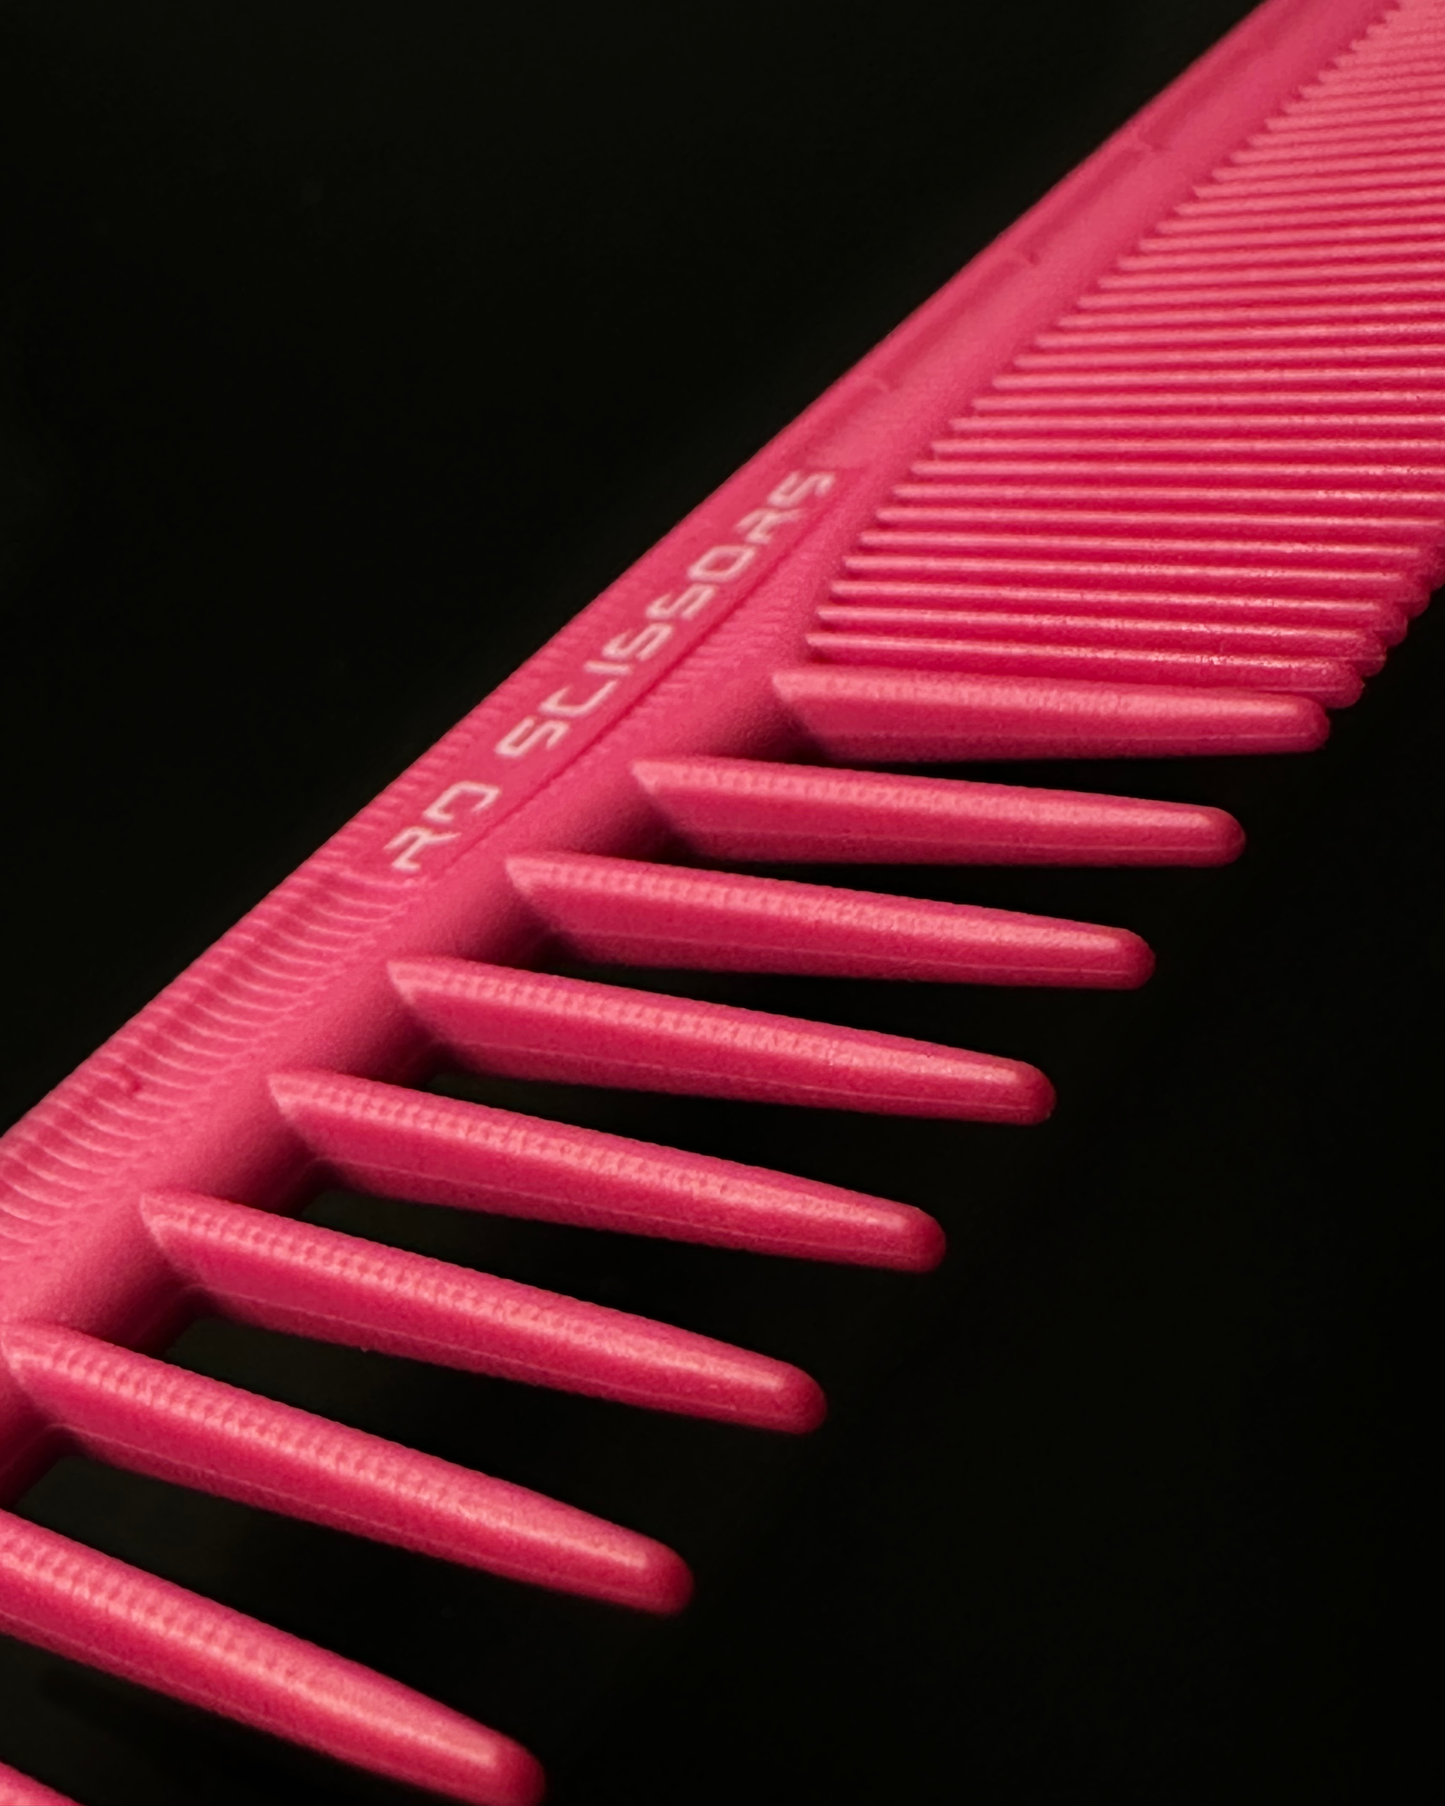 8” Carbon Wide / Fine tooth combo comb